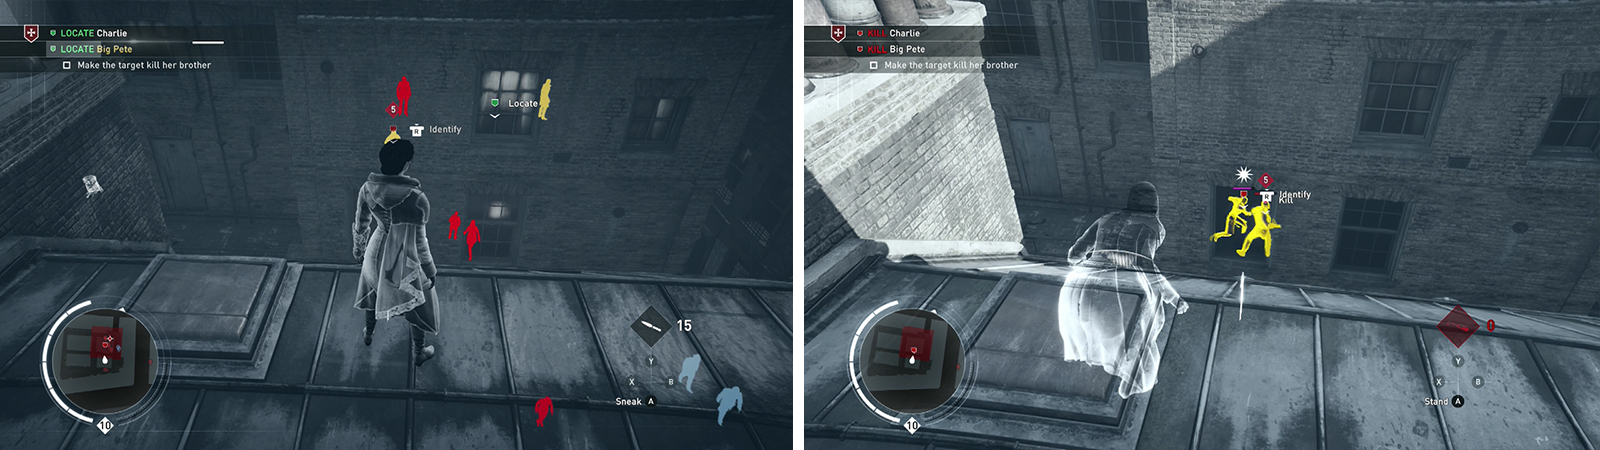 Kill the enemy in the window to draw the targets (left). Use the hallucinogenic darts to have them kill each other (right).